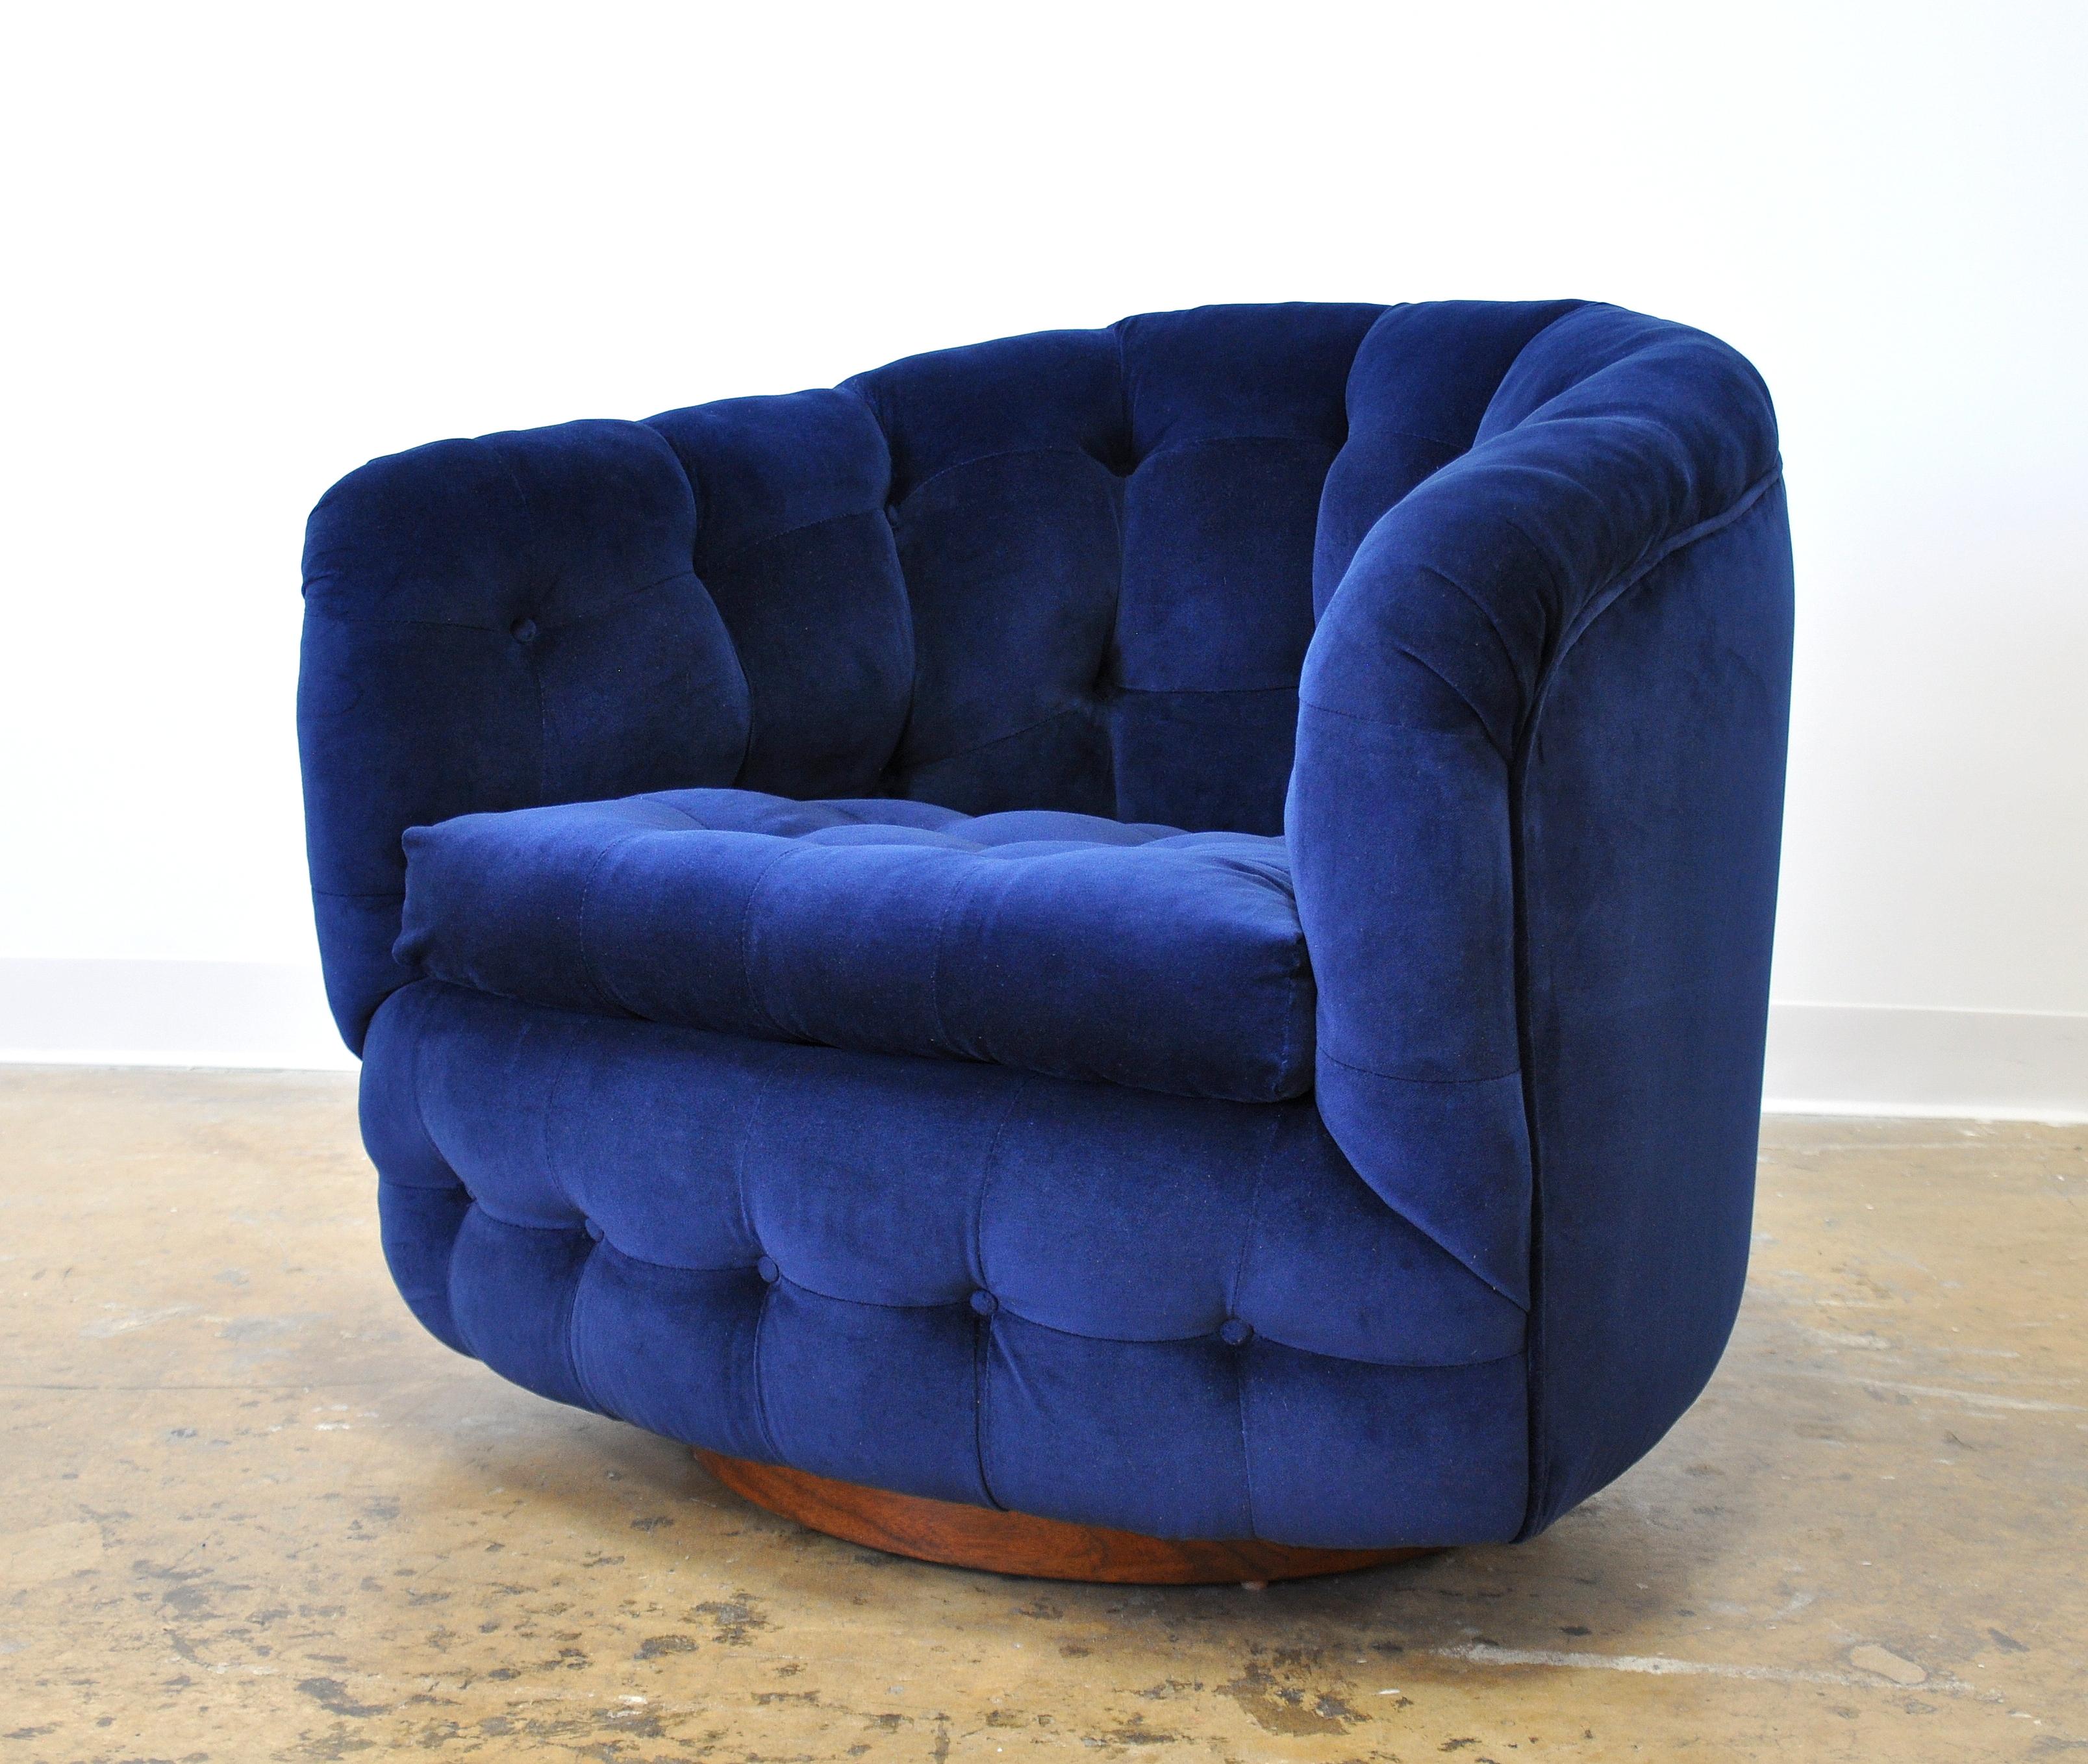 A fabulous Mid-Century Modern tufted barrel back swiveling and rocking club chair, designed by Milo Baughman for Thayer Coggin, and dating from the 1960s. Fully restored and reupholstered in a luxurious and rich sapphire navy blue jewel tone velvet;